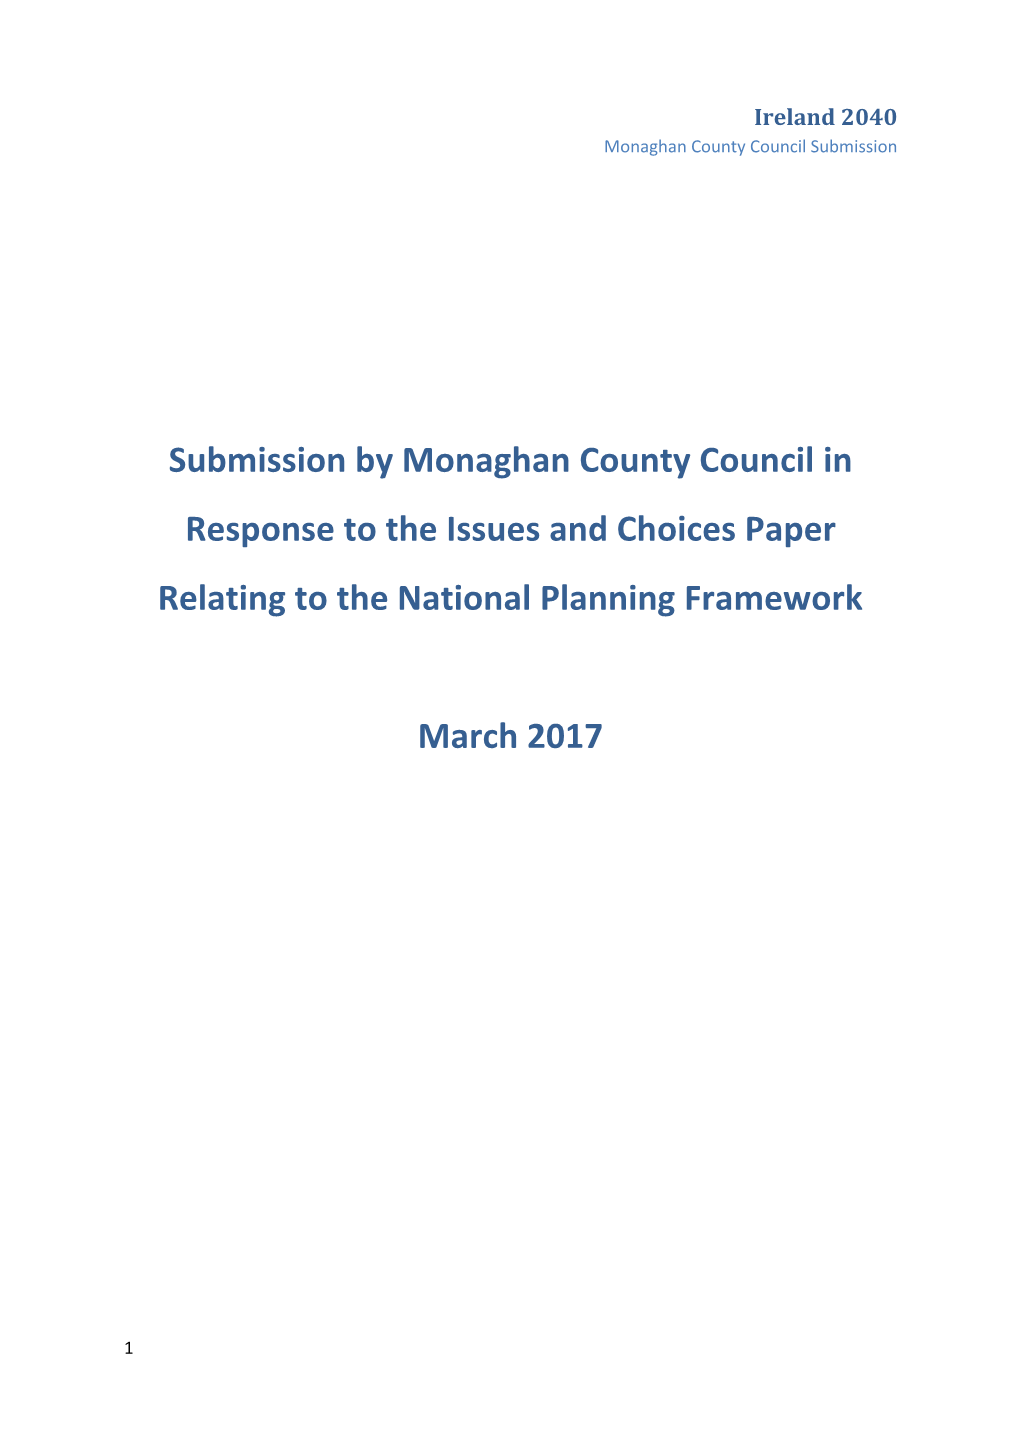 0503 Monaghan County Council